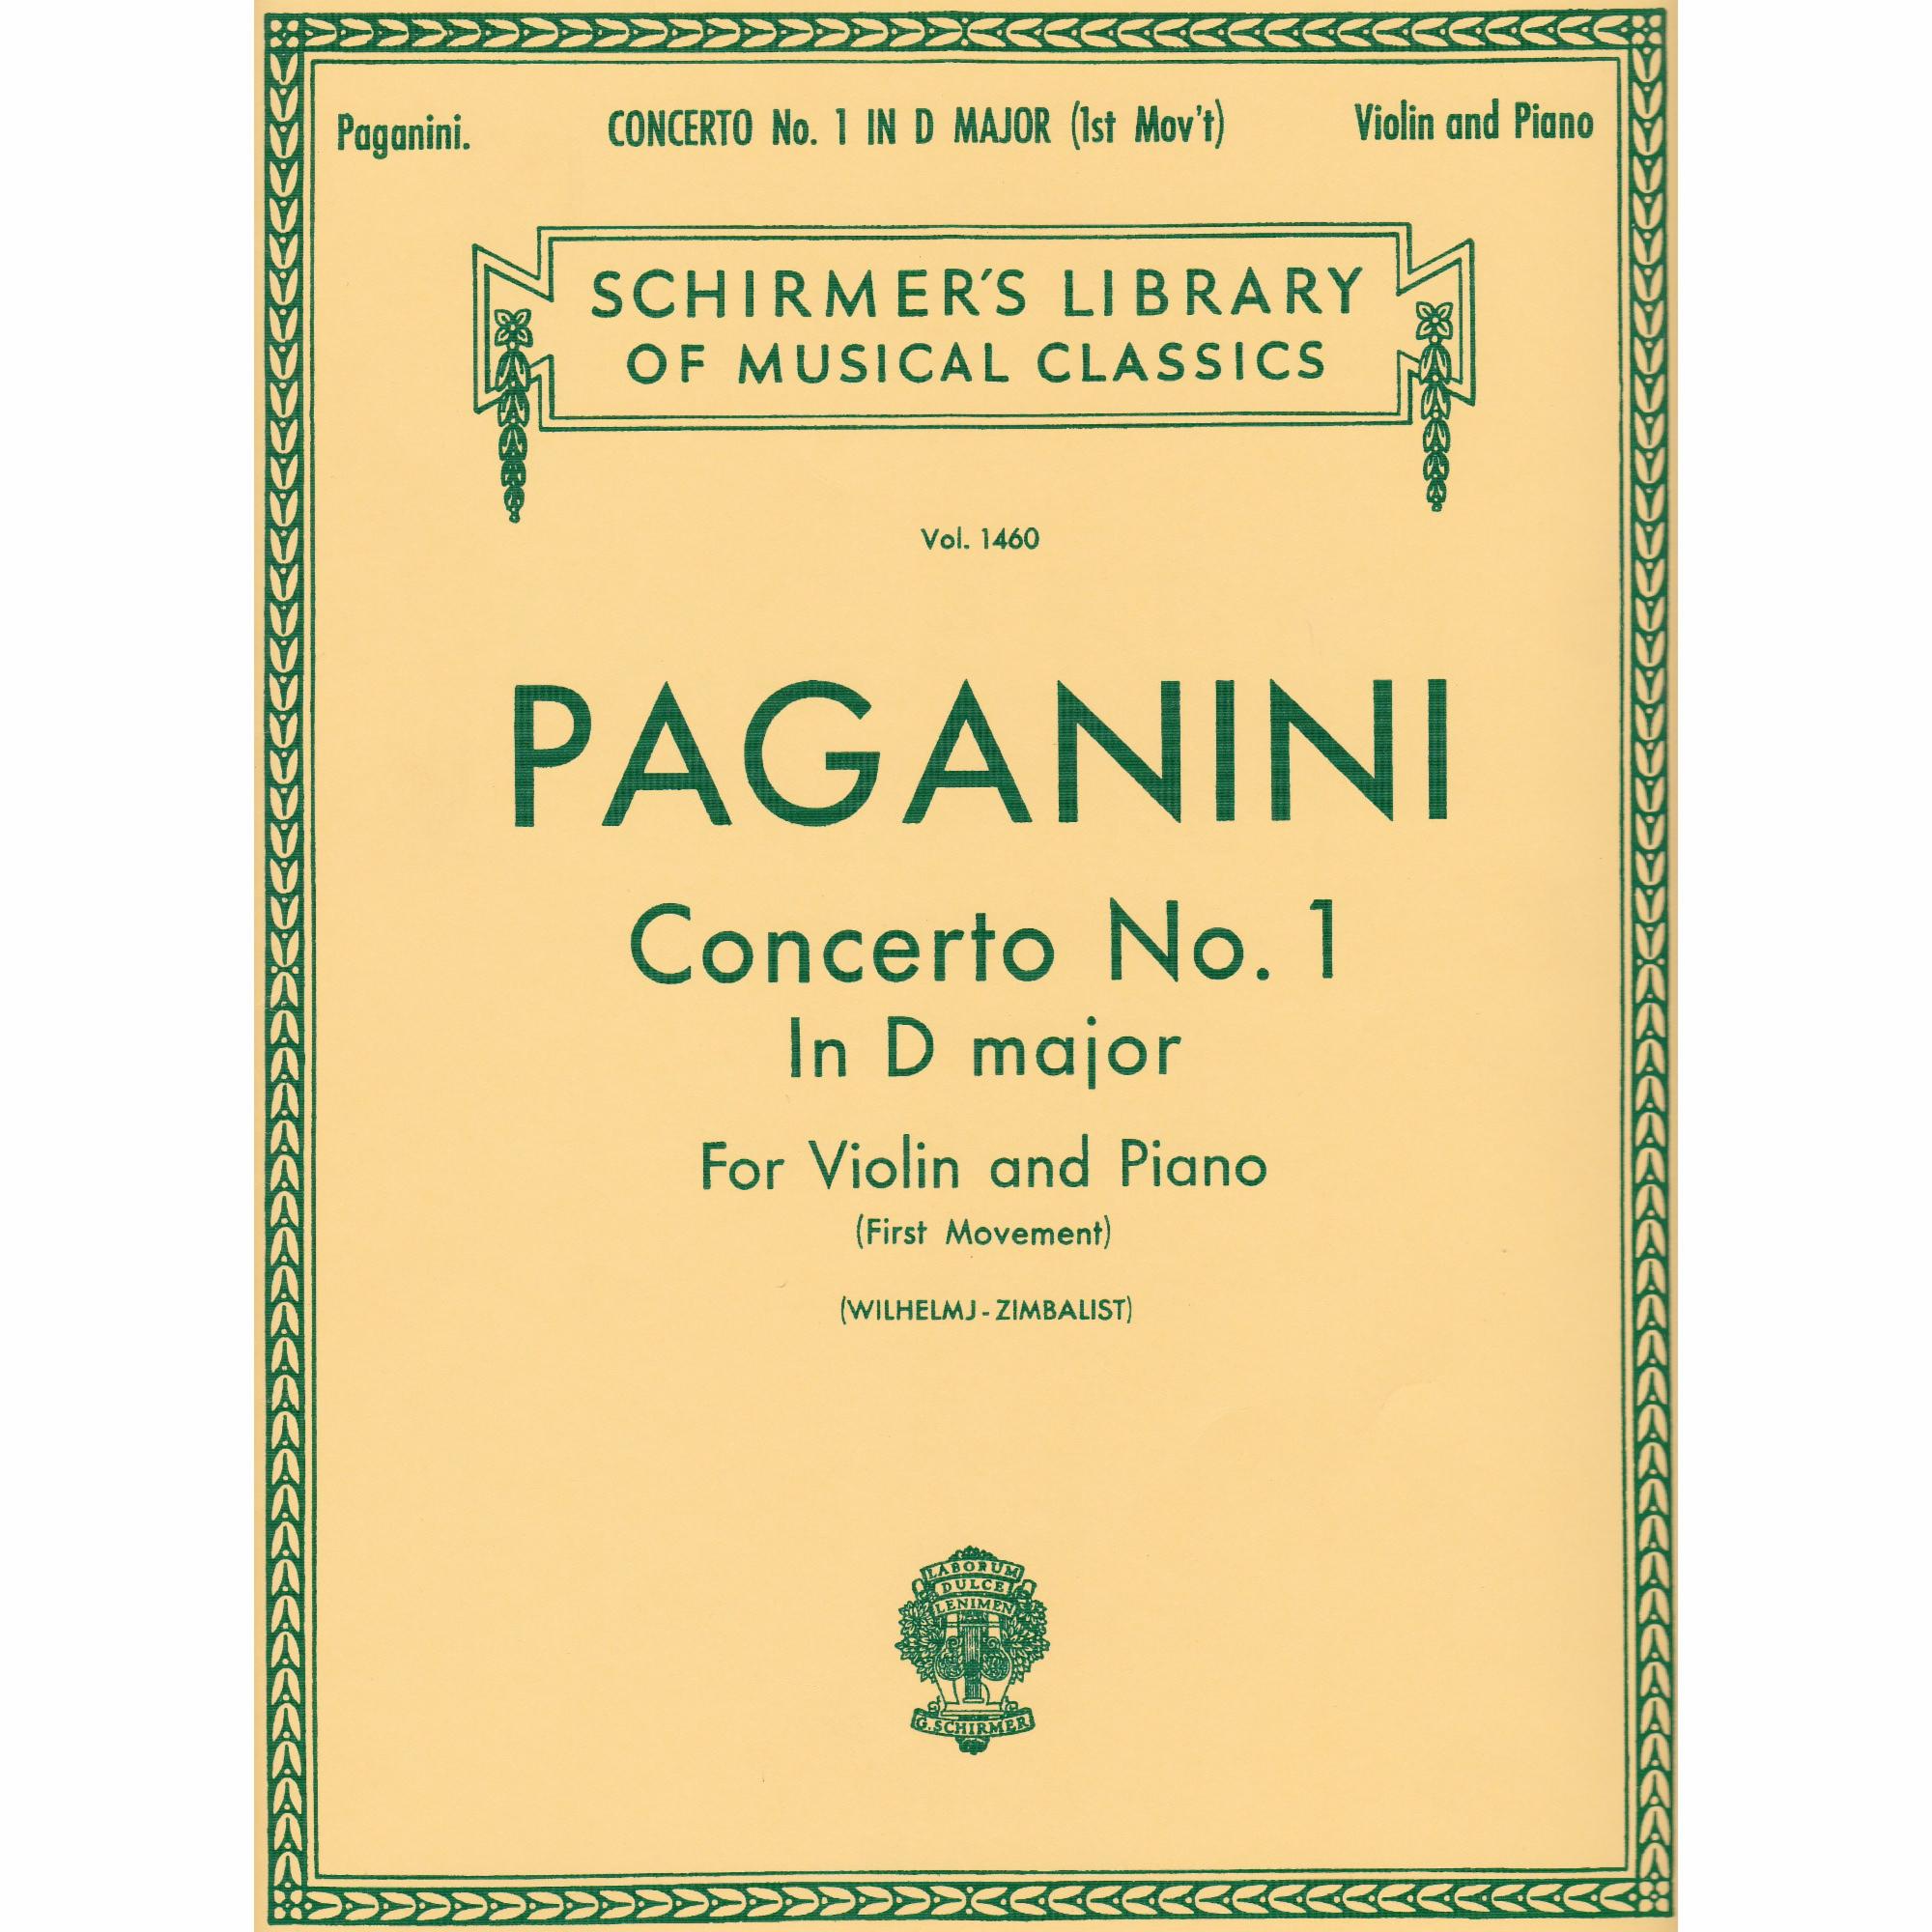 Paganini -- Concerto No. 1 in D Major, Op. 6 (First Movement) for Violin and Piano